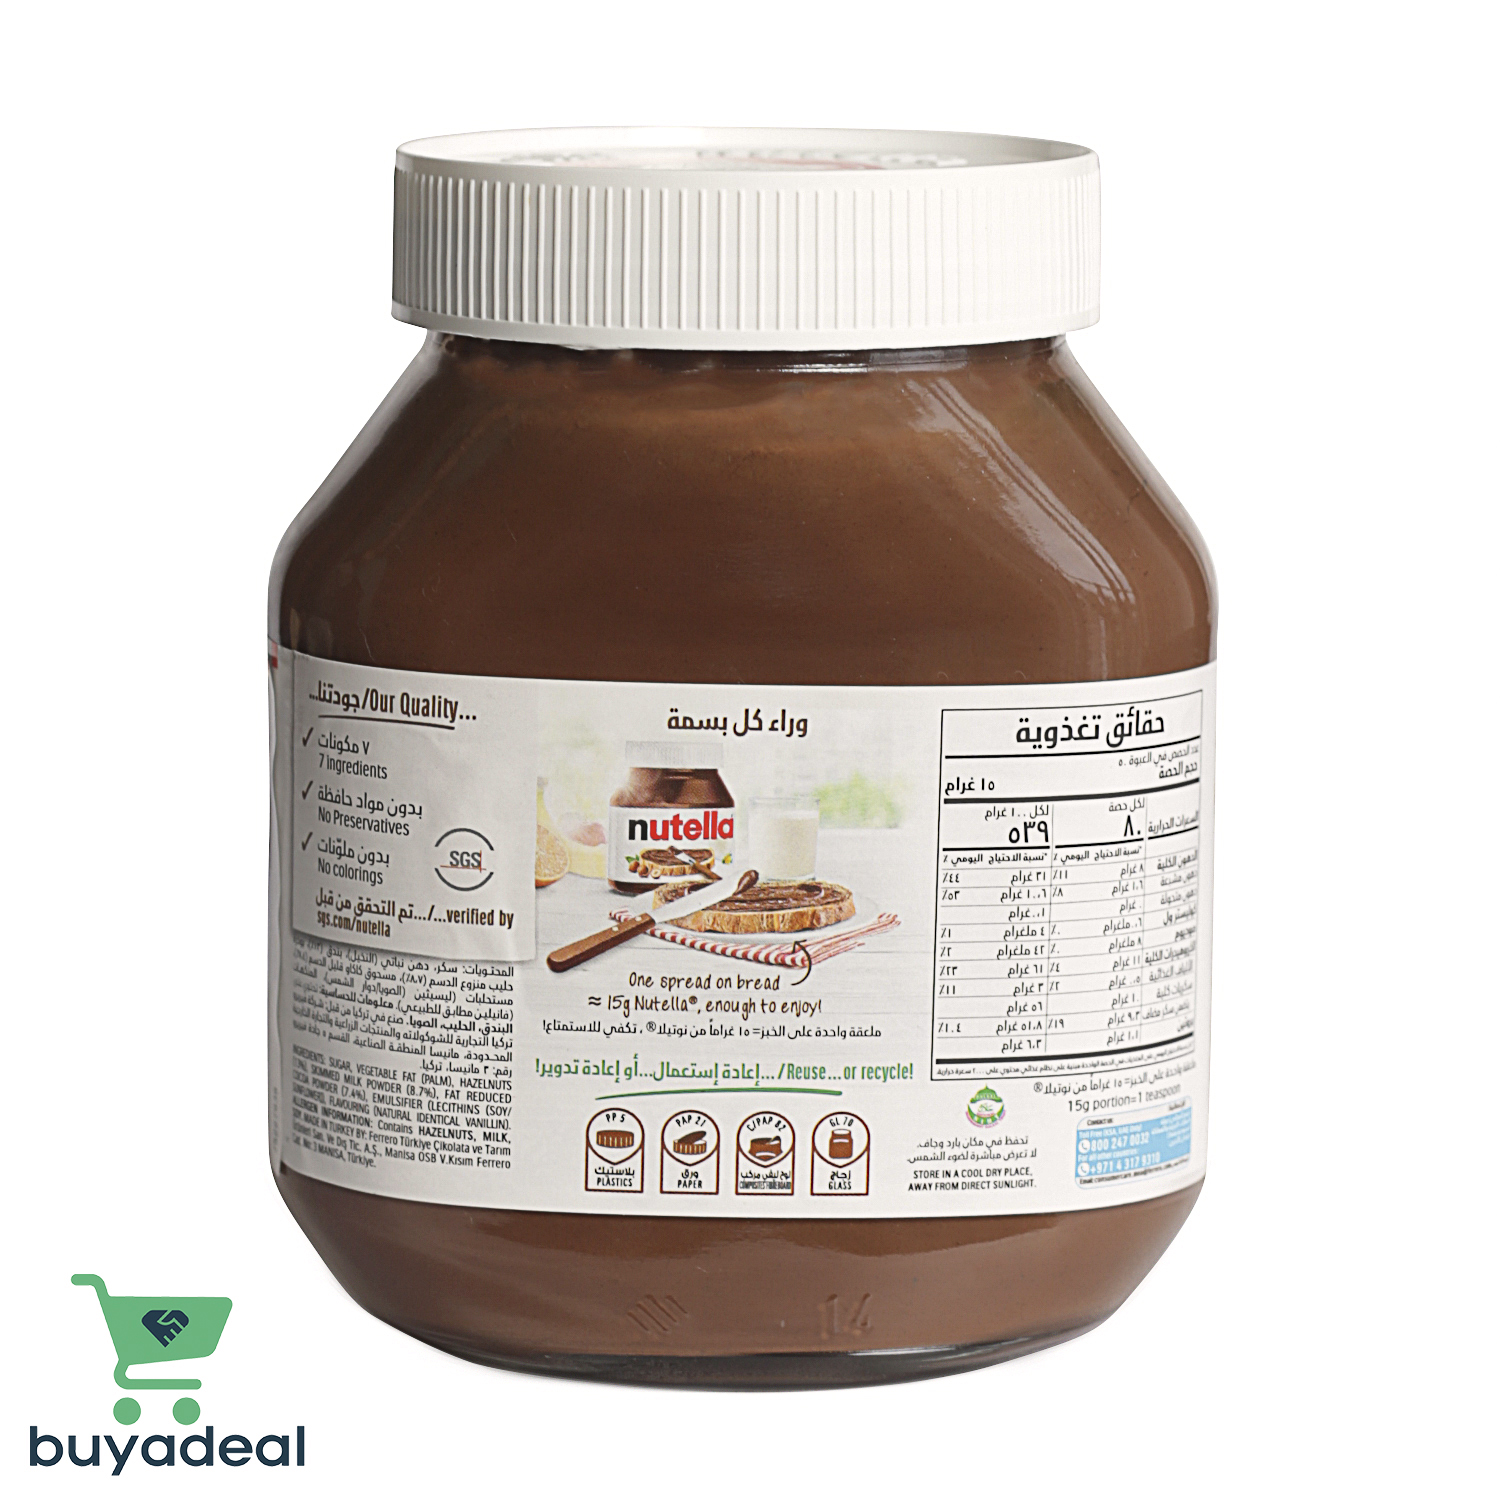 Buyadeal Product Nutella Hazelnut Spread with Cocoa 400g